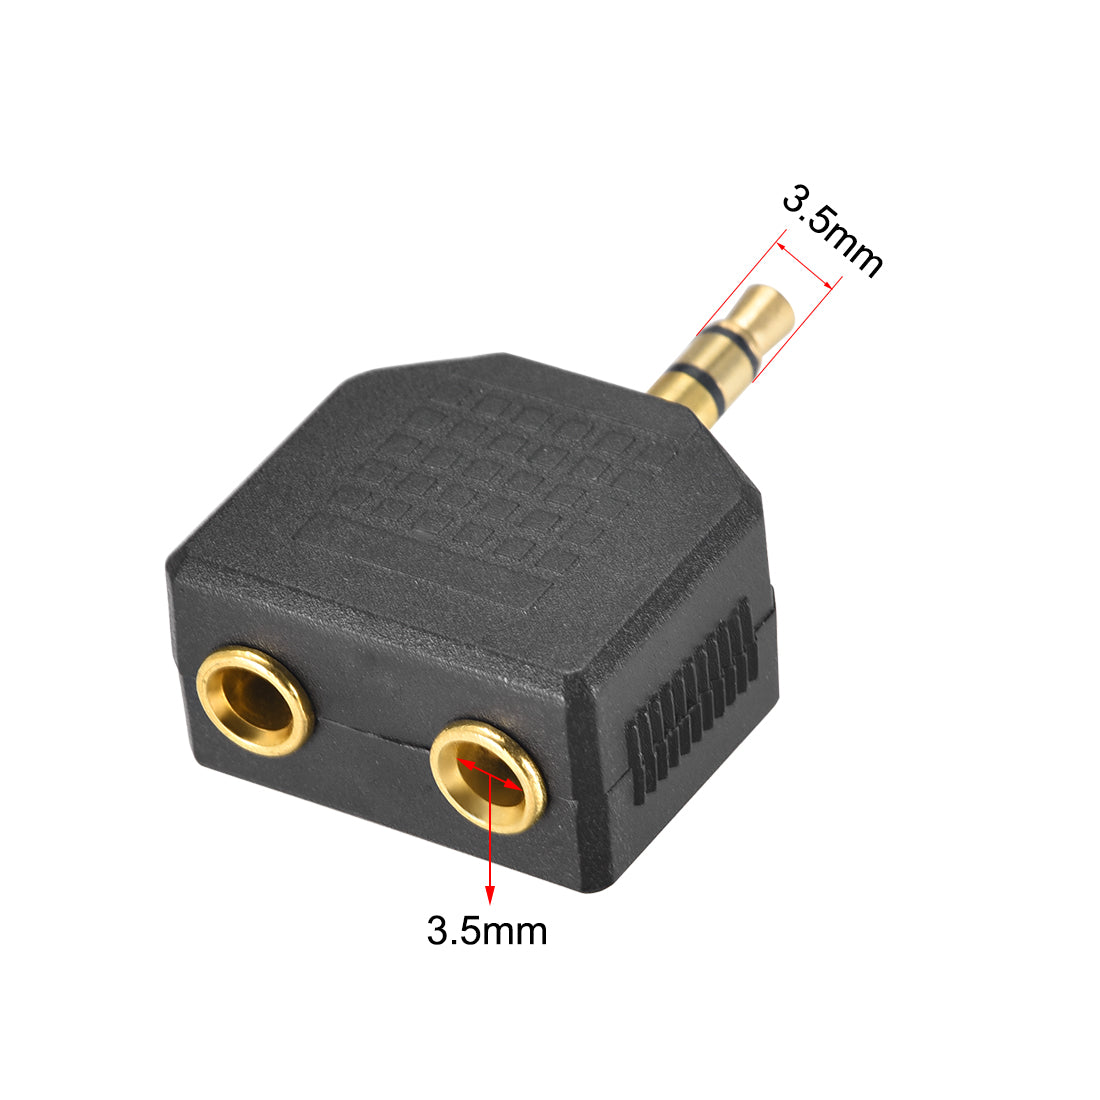 uxcell Uxcell 1Pcs 3.5mm Male to Dual 3.5mm Female Connector Splitter Adapter Coupler for Stereo Audio Video AV Cable Convert